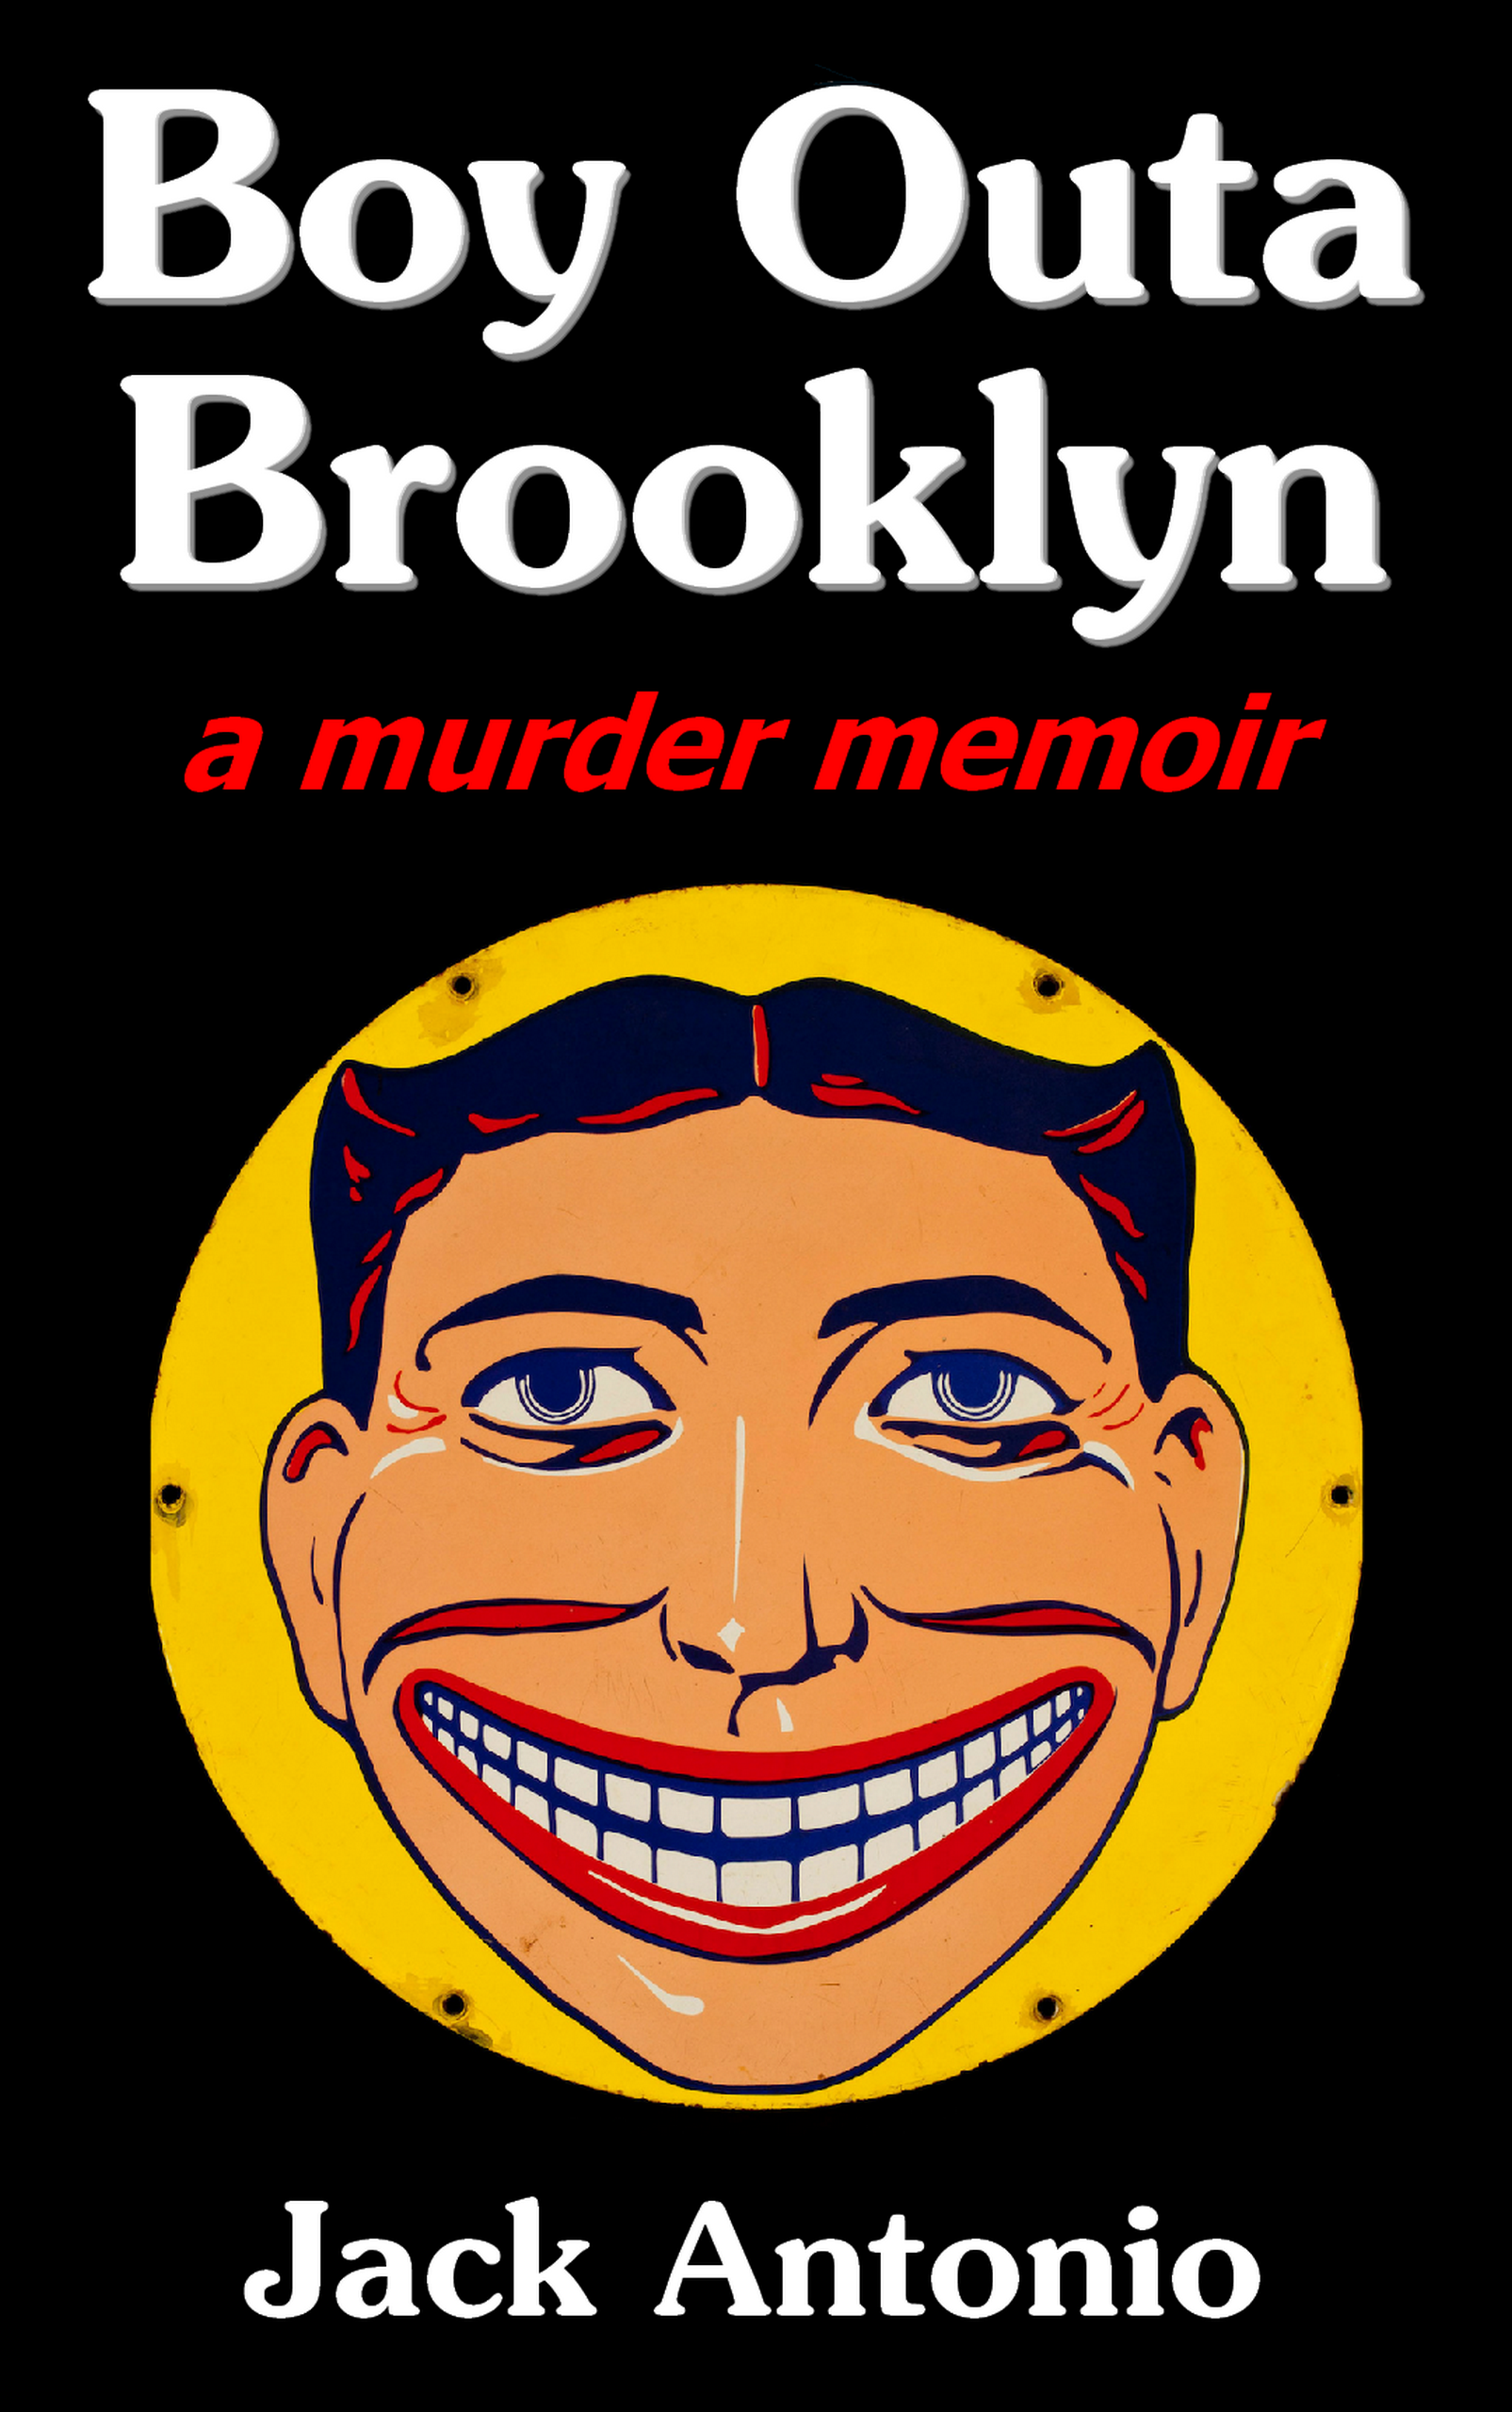 Boy Outa Brooklyn a murder memoir by Jack Antonio. 
Image: The smiling face of Steeplechase Park in Coney Island, Brooklyn